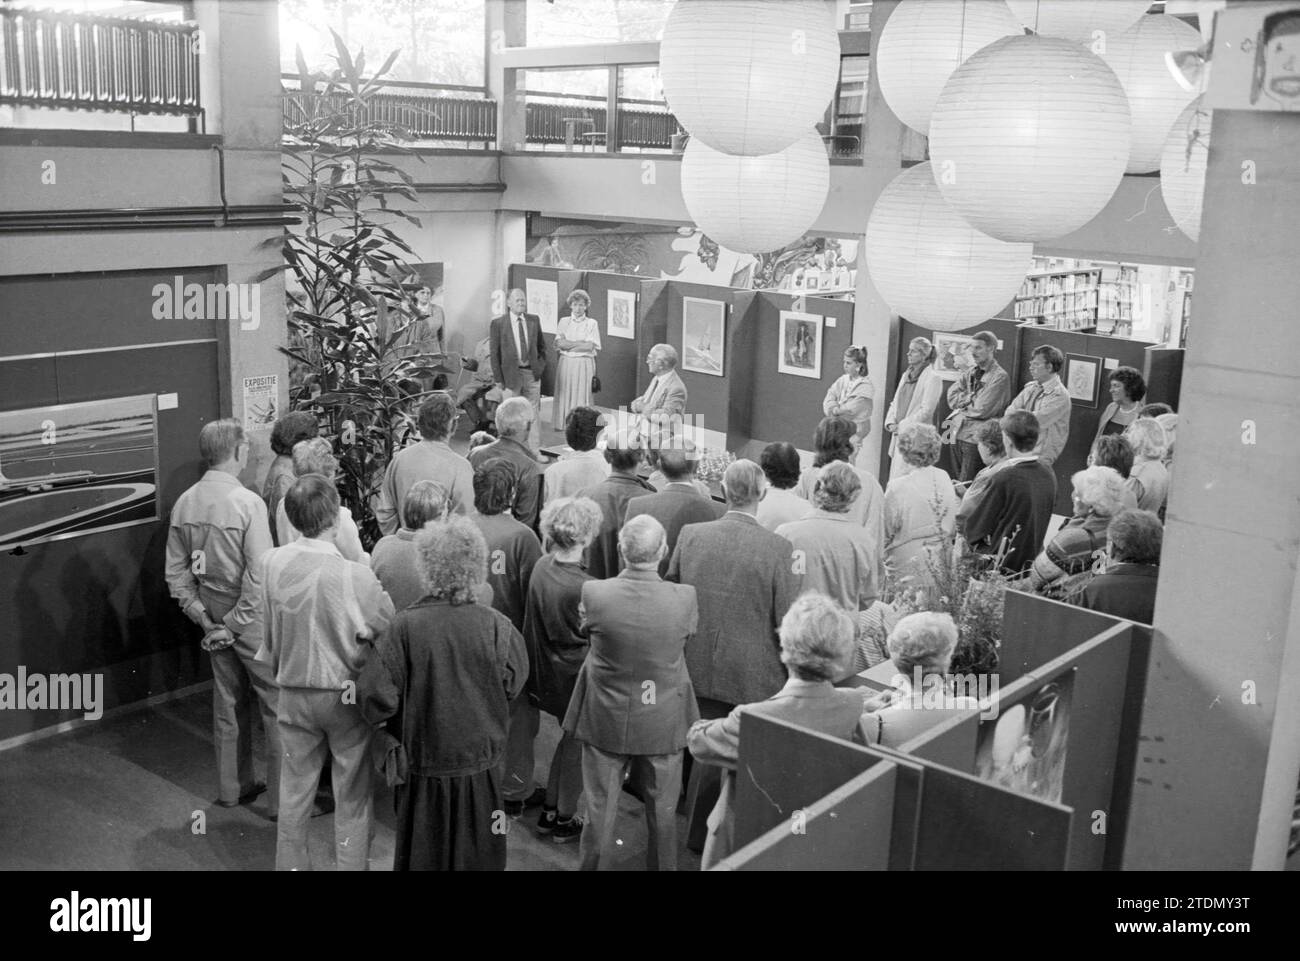 Group of persons listening to speech in exhibition room within a library, 03-08-1987, Whizgle News from the Past, Tailored for the Future. Explore historical narratives, Dutch The Netherlands agency image with a modern perspective, bridging the gap between yesterday's events and tomorrow's insights. A timeless journey shaping the stories that shape our future Stock Photo